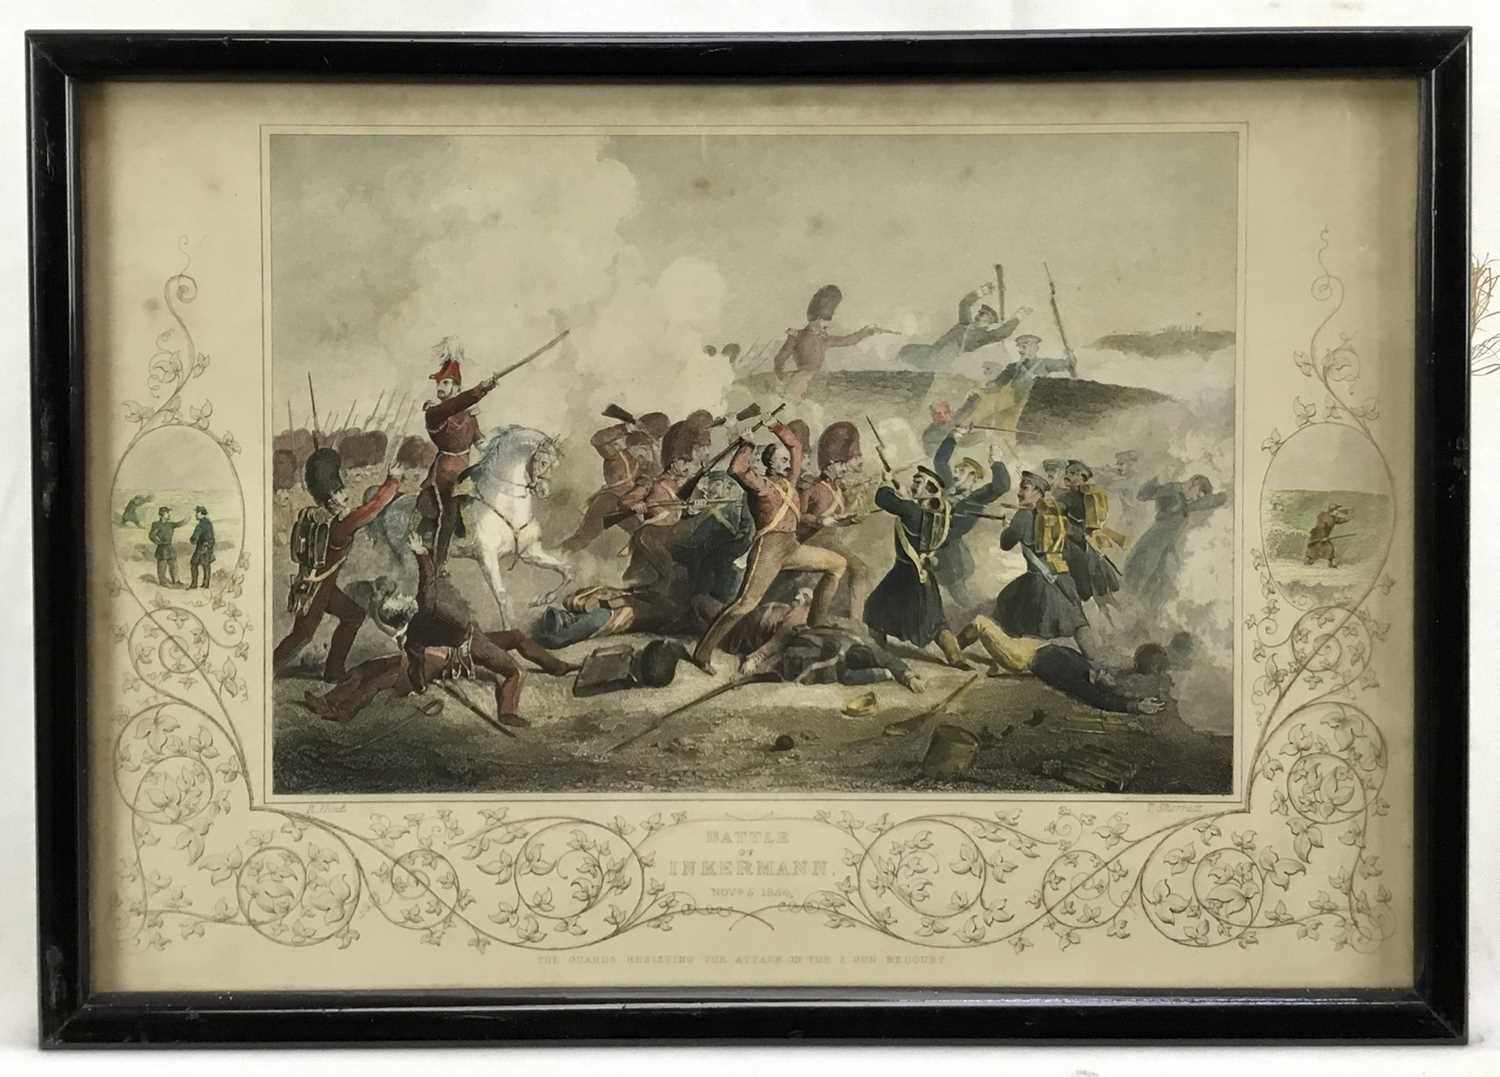 Lot 73 - 19th century coloured engraving. “Battle of Inkermann, November 5th 1854, the Guards resisting the attack on the two gun redoubt”, by R Hind and T Sherratt. Framed. Overall including frame 19x26.5c...